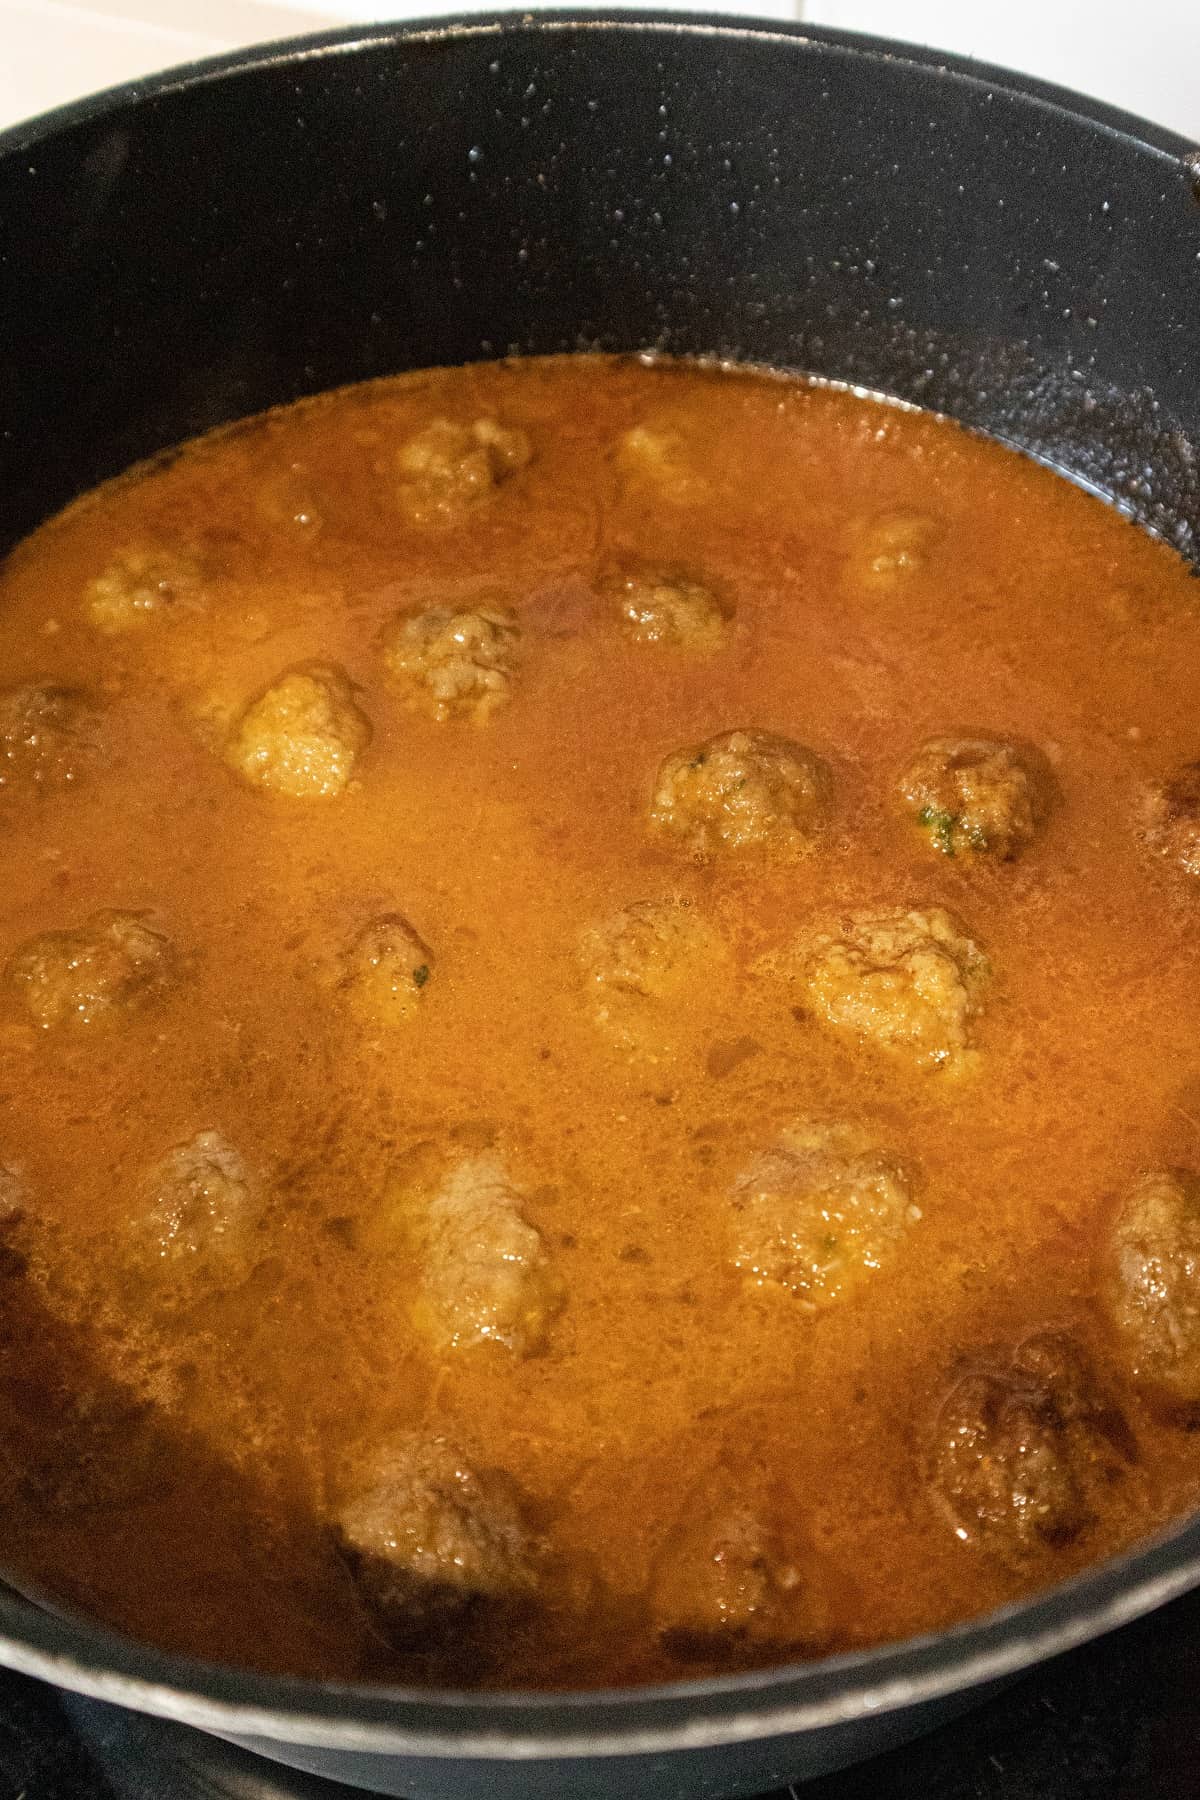 Add the meatballs to the tomato onion sauce